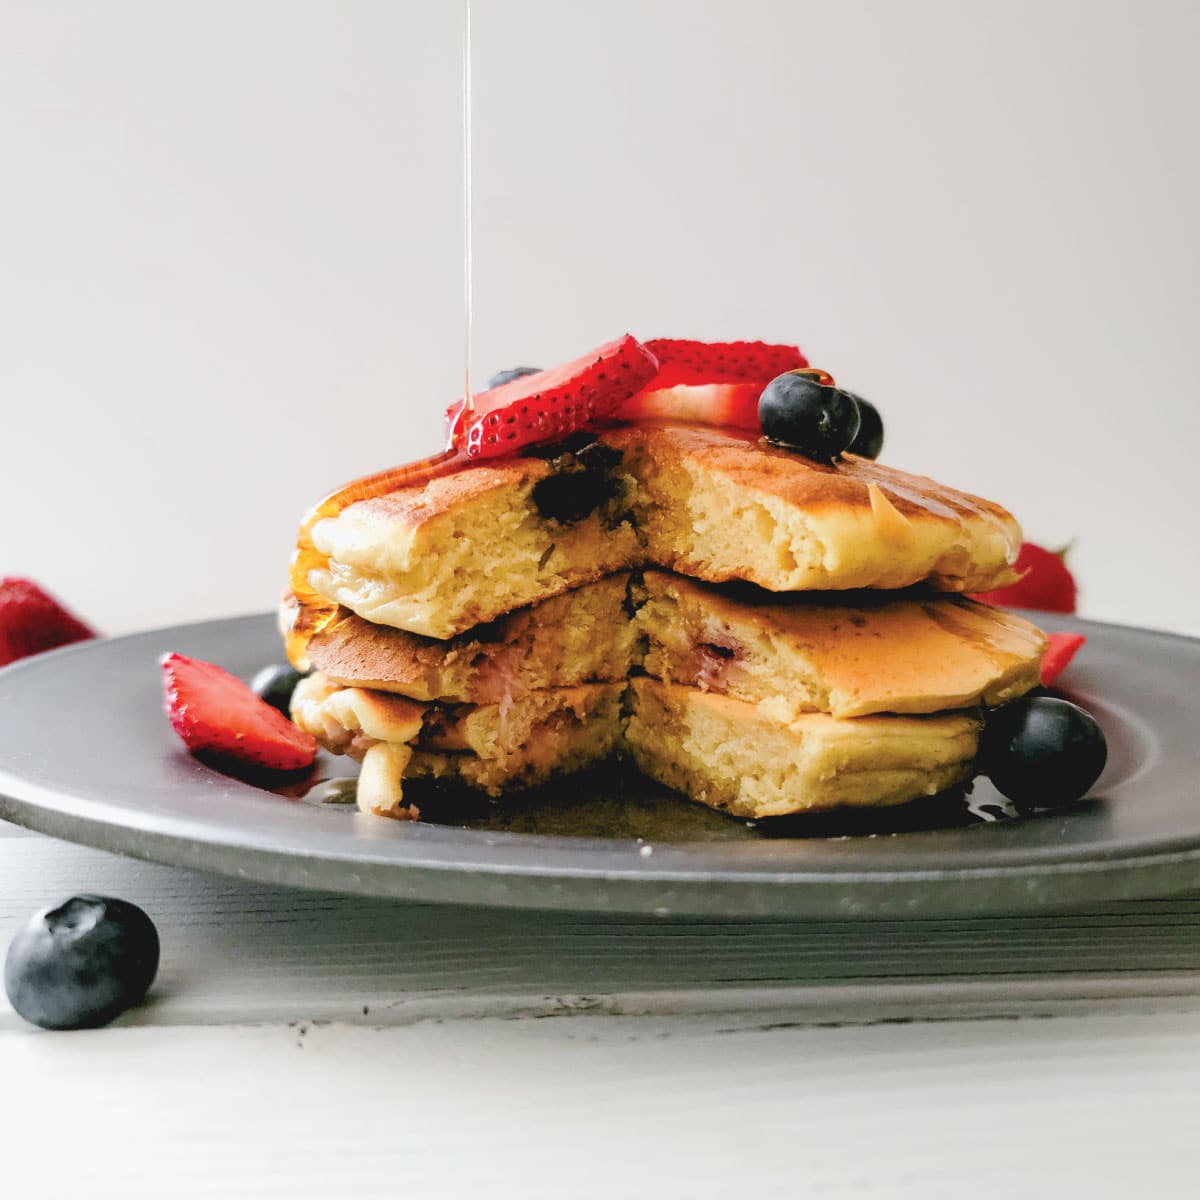 Pancakes on a plate topped with strawberries and blueberries while maple syrup is being poured over them.